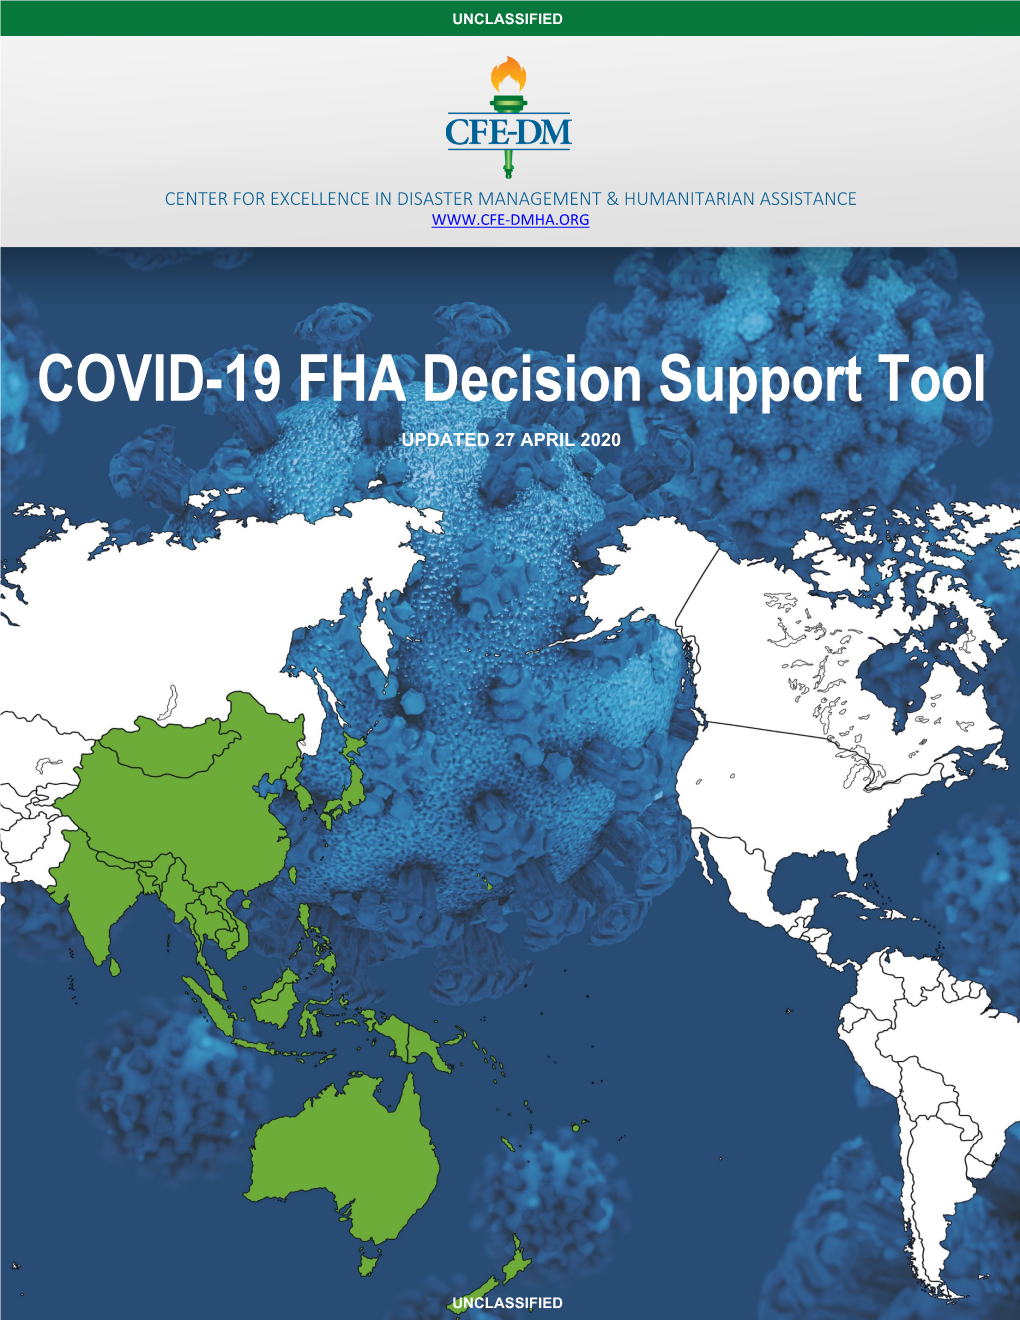 COVID-19 FHA Decision Support Tool UPDATED 27 APRIL 2020